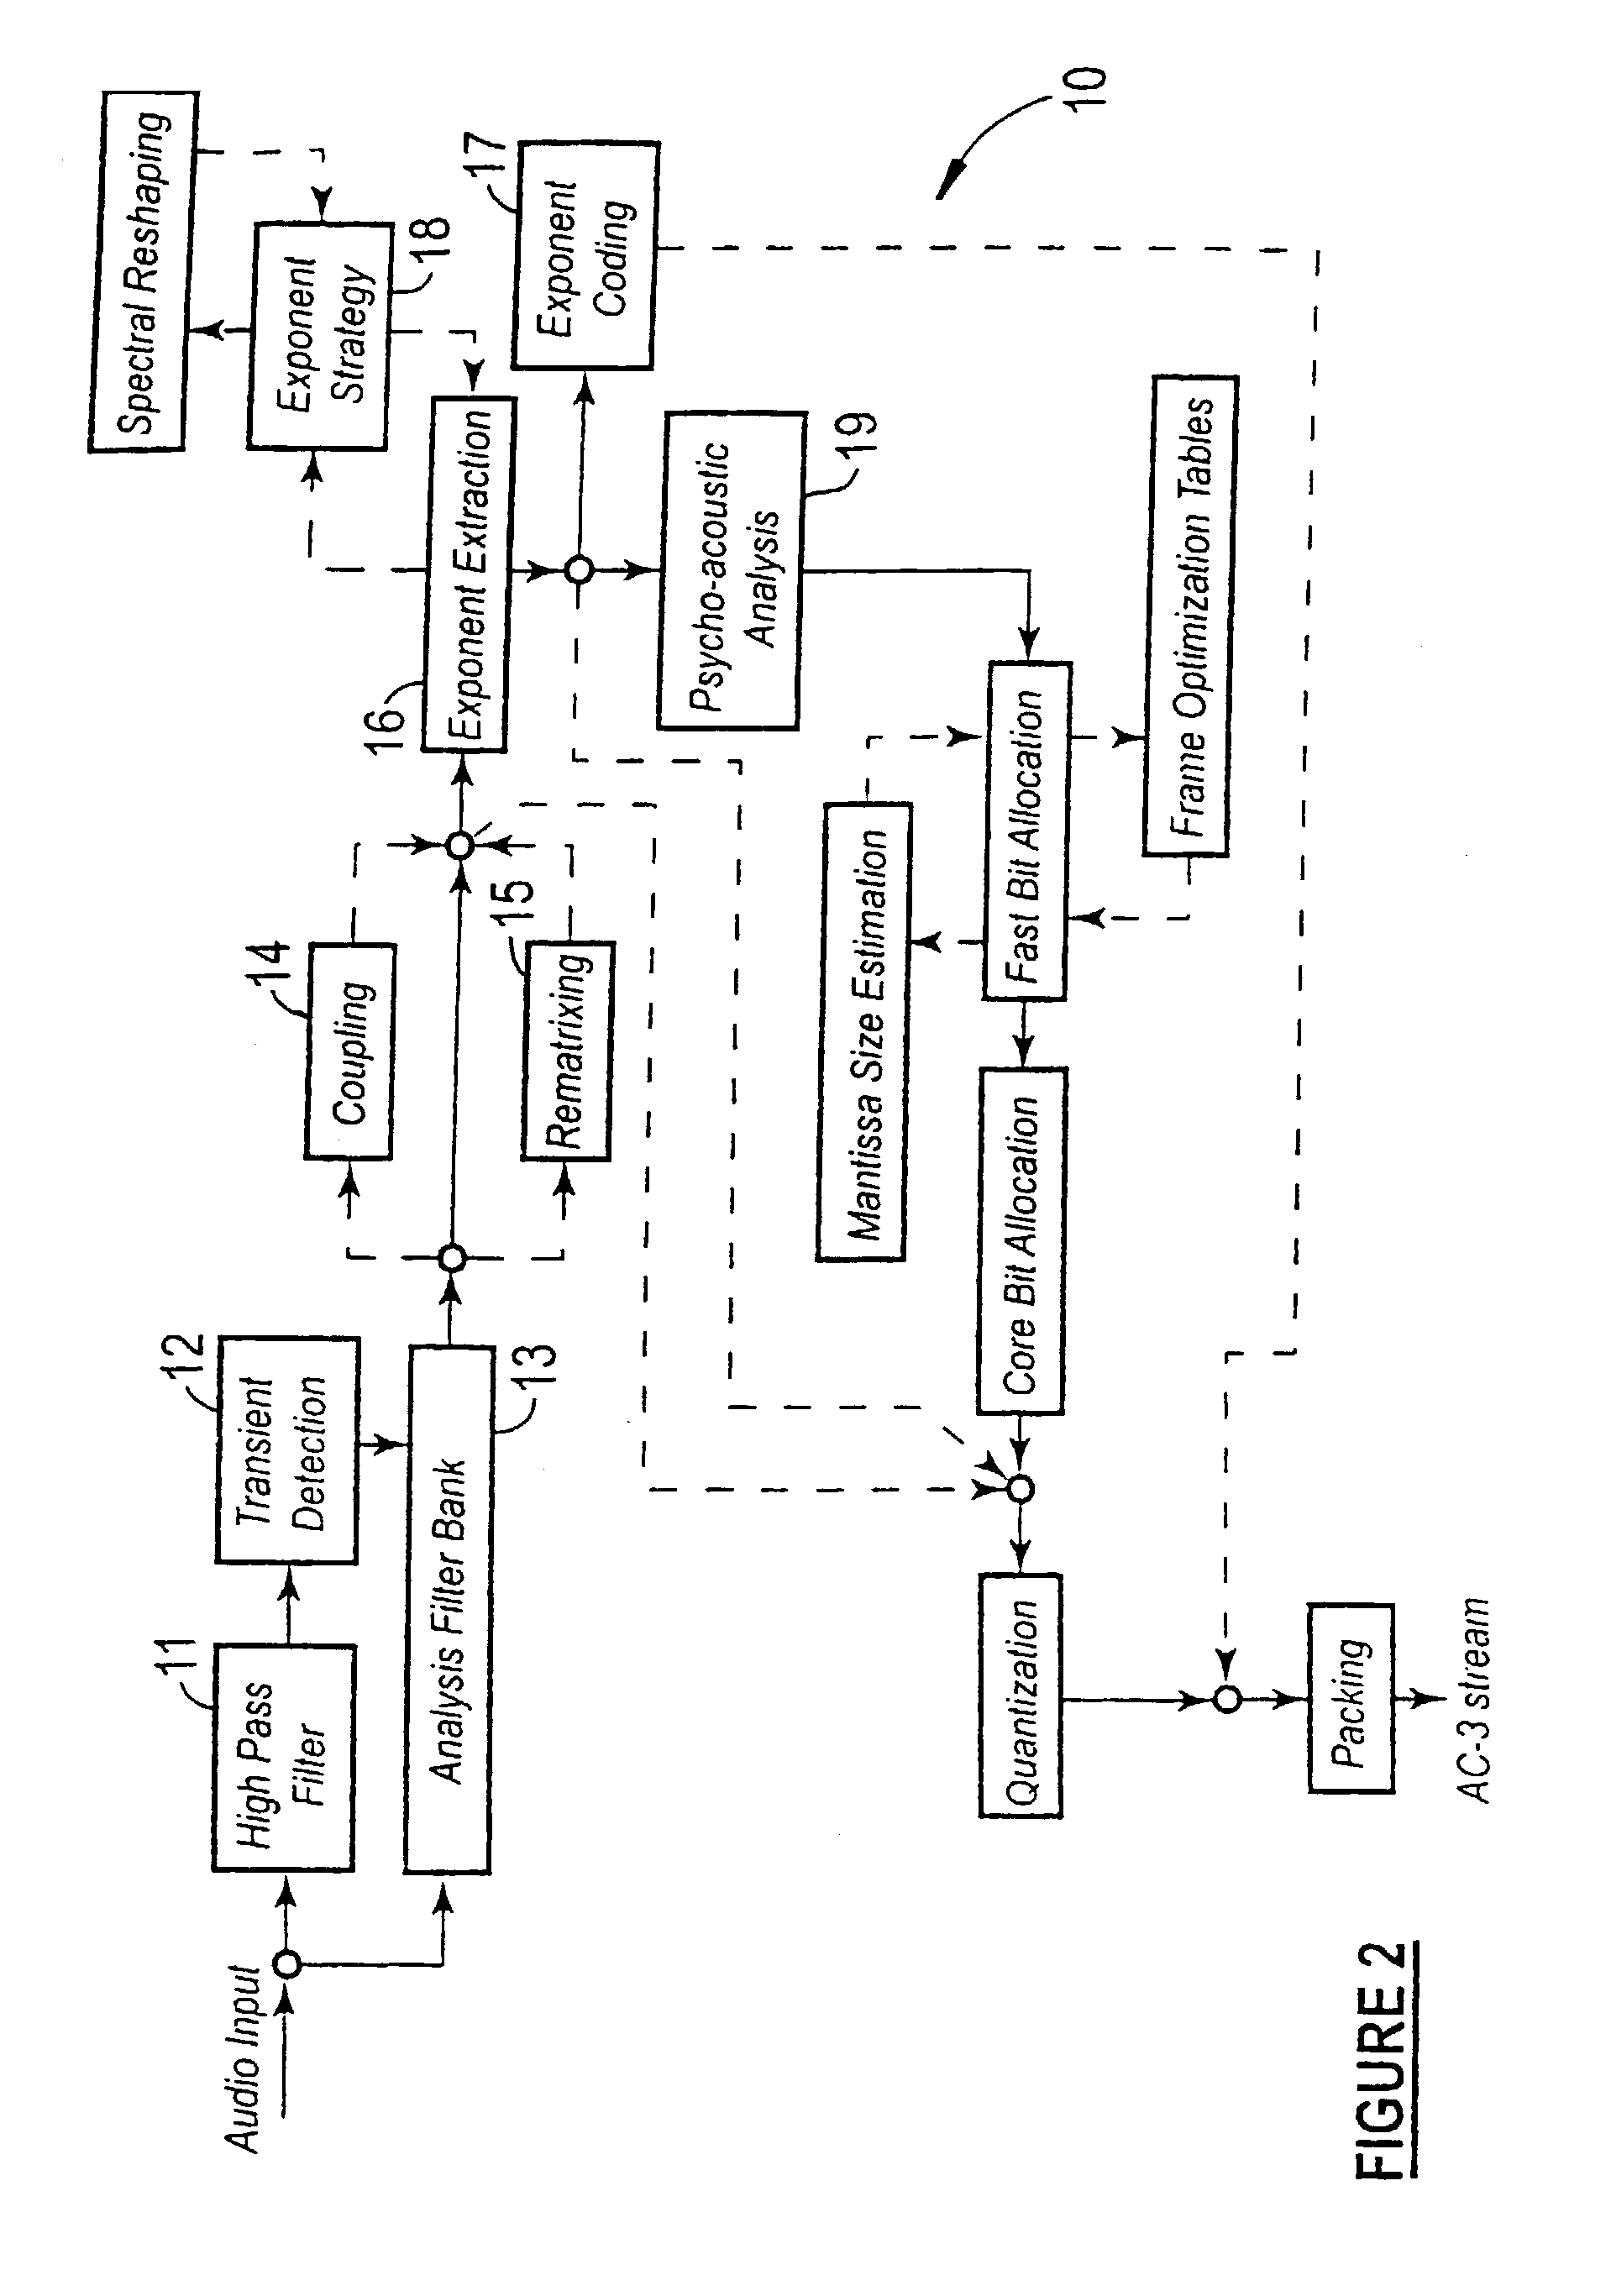 Channel coupling for an AC-3 encoder